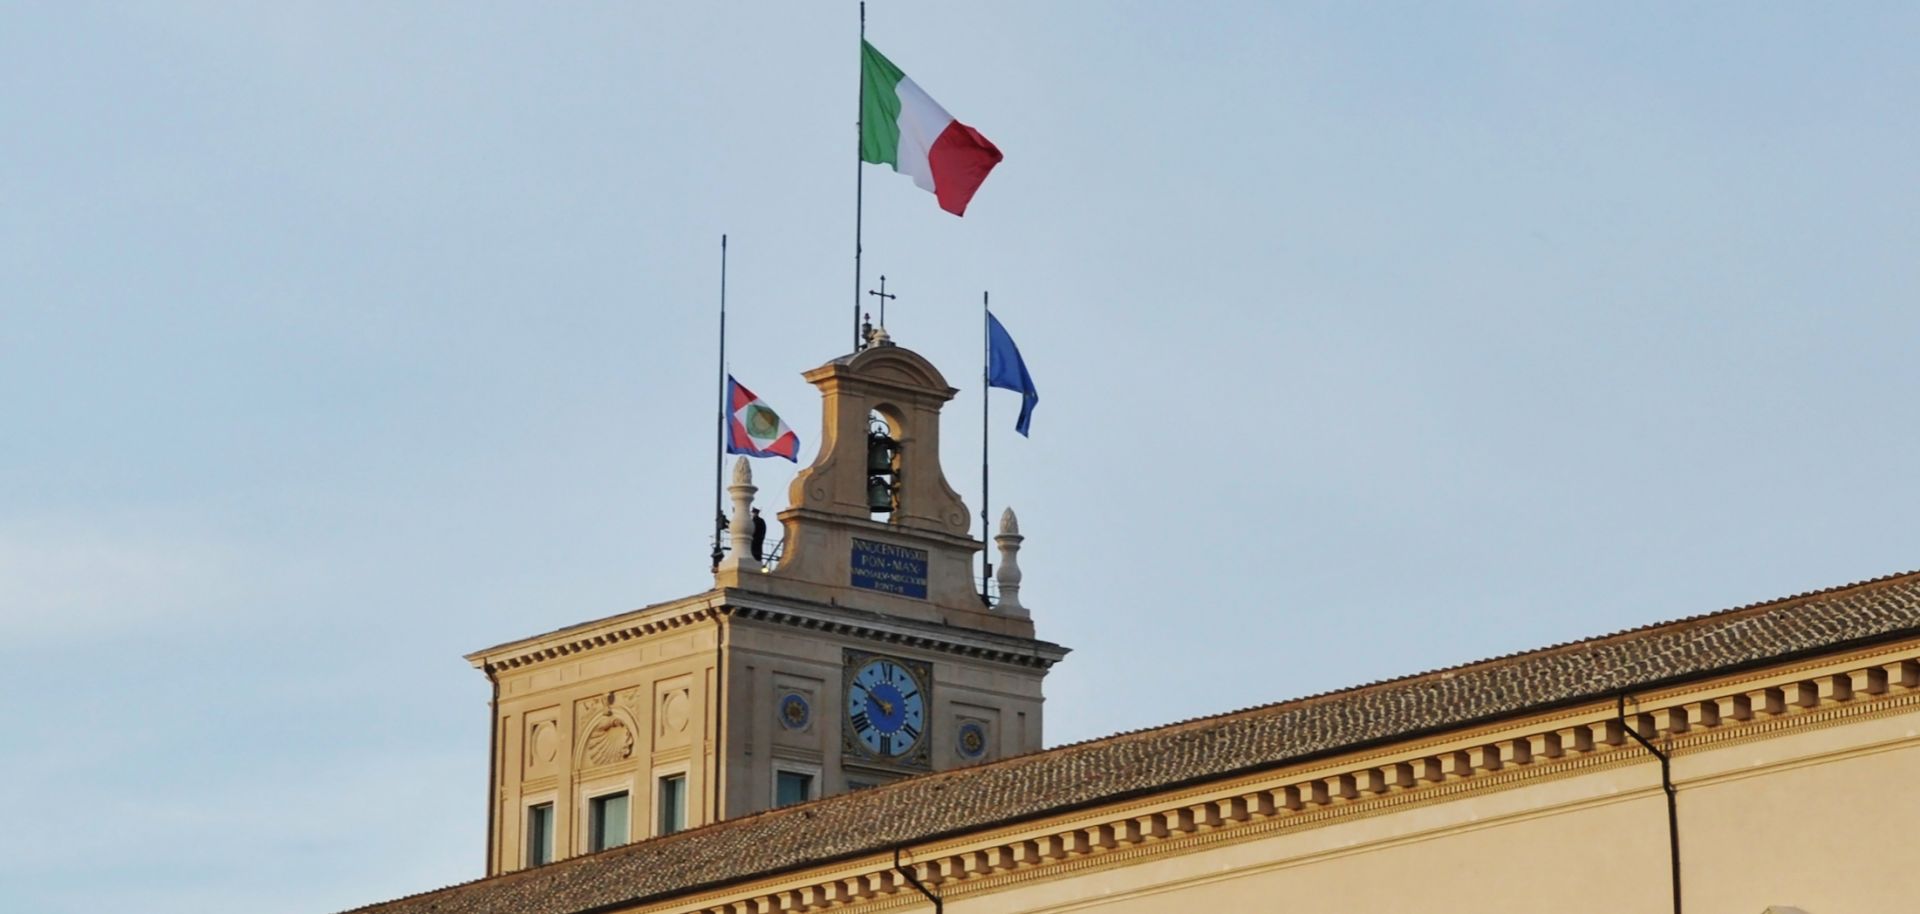 A photo taken on Feb. 3, 2022, shows flags raised outside the Quirinale in Rome, Italy, for the arrival of newly re-elected Italian President Sergio Mattarella.